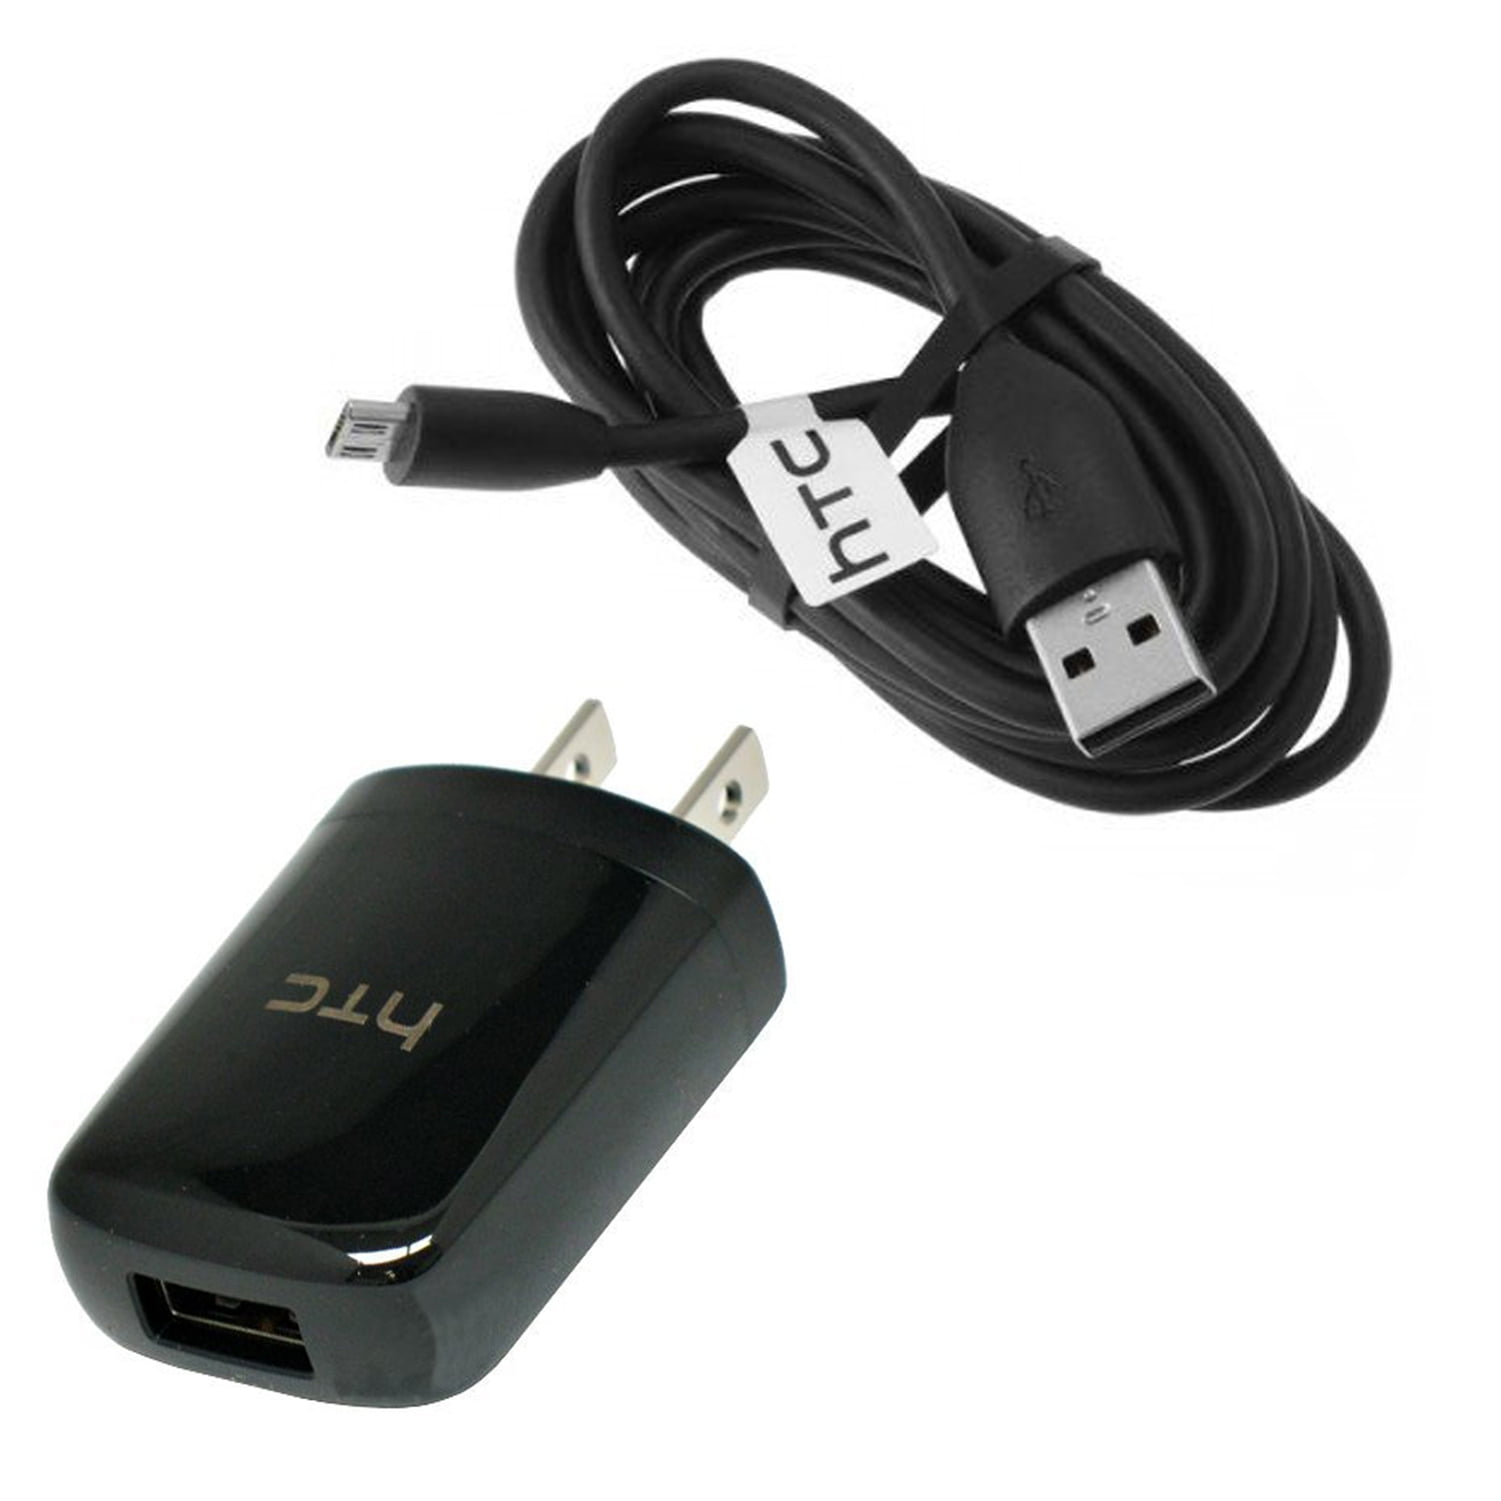 Genuine OEM Arlo Netgear USB Cable and Charger for Pro & Pro 2 Model Cameras 